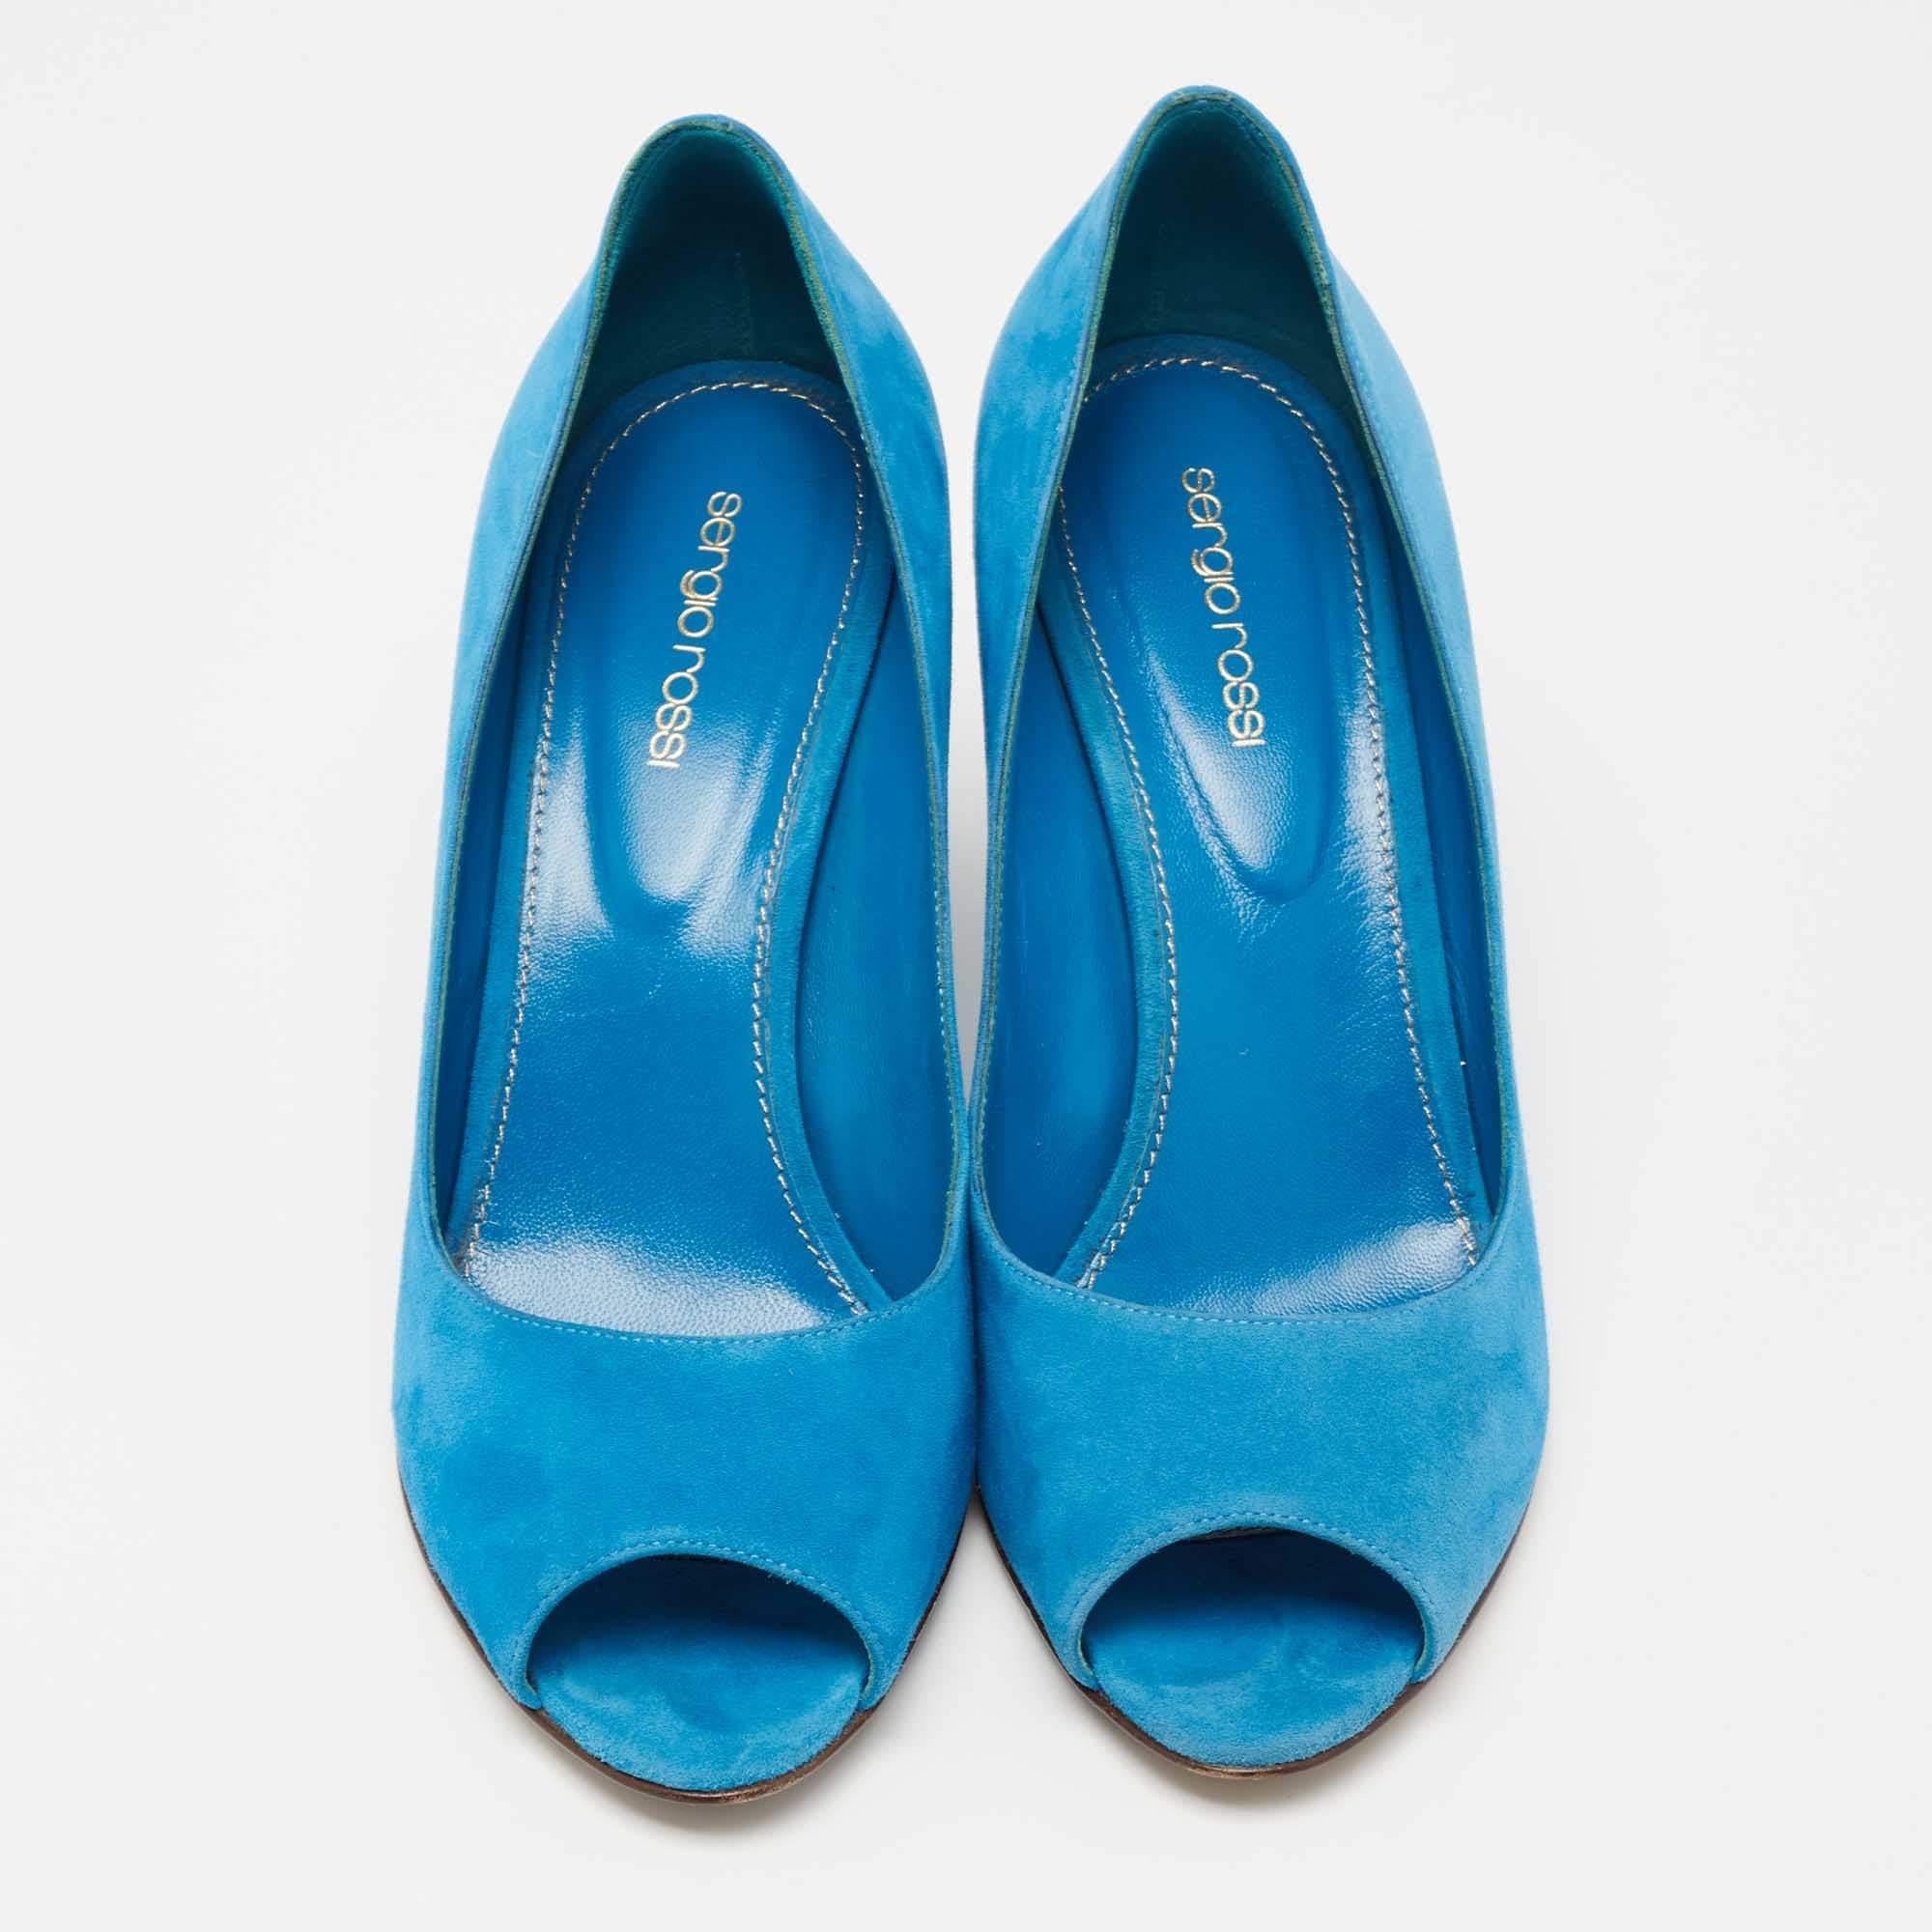 These Sergio Rossi pumps are elegant, feminine, and easy to style. Made from soft suede, they flaunt an appealing shade of blue and covetable peep-toes. The pair is complete with 9 cm wedge heels for the right amount of elevation.

